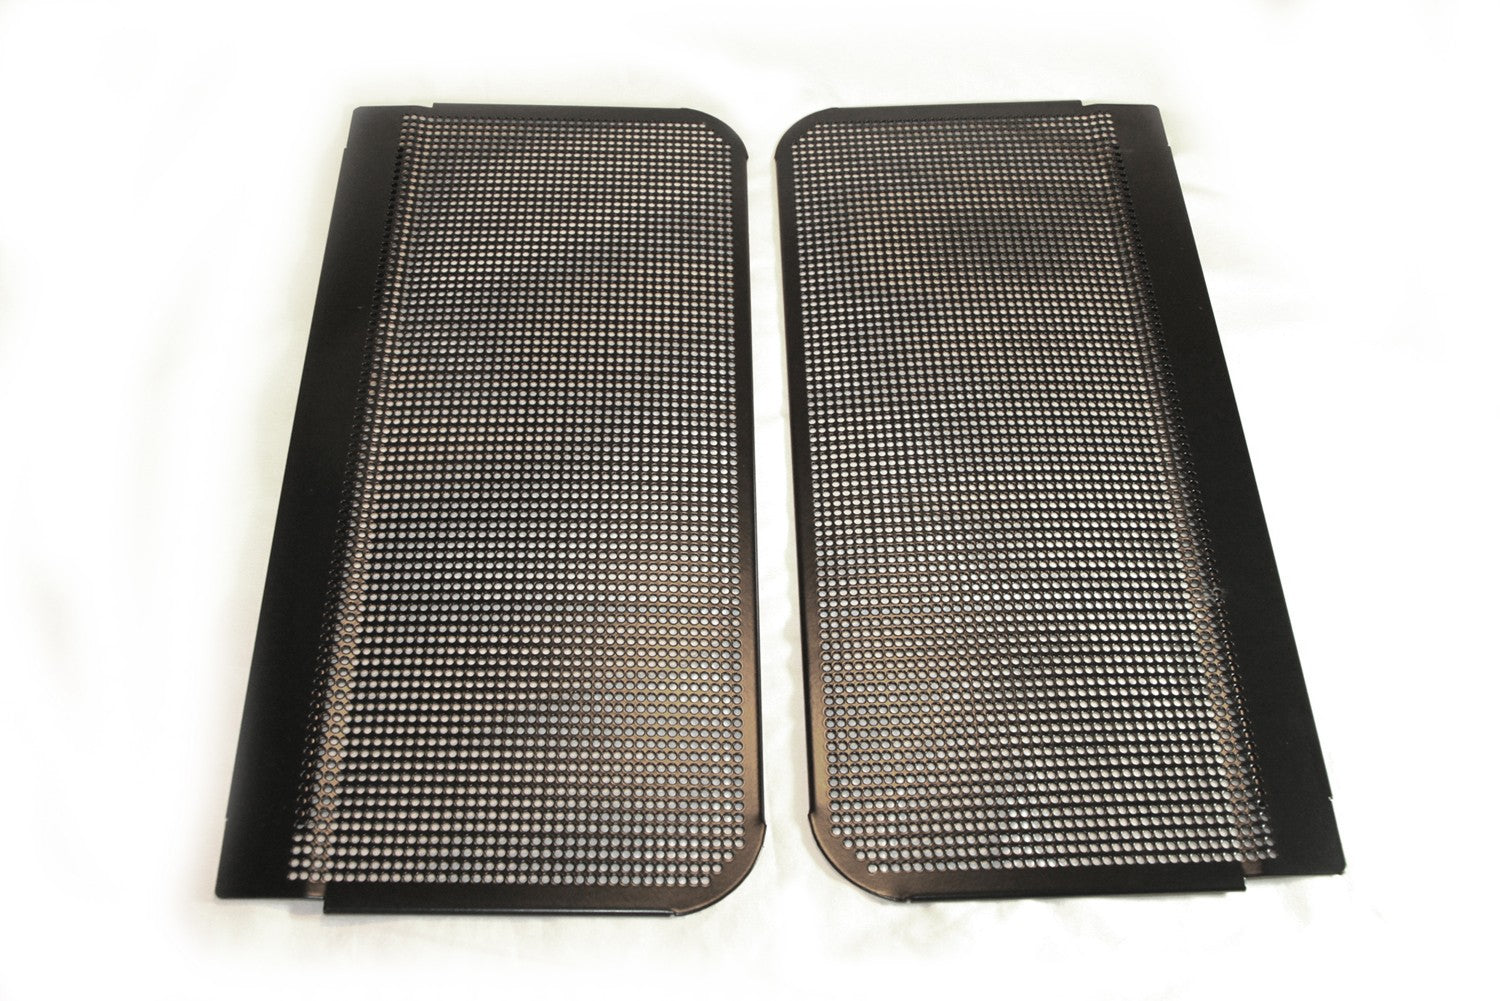 Station Wagon Rear Window Security Screens - for Land Rover 90/110 (set of 2)